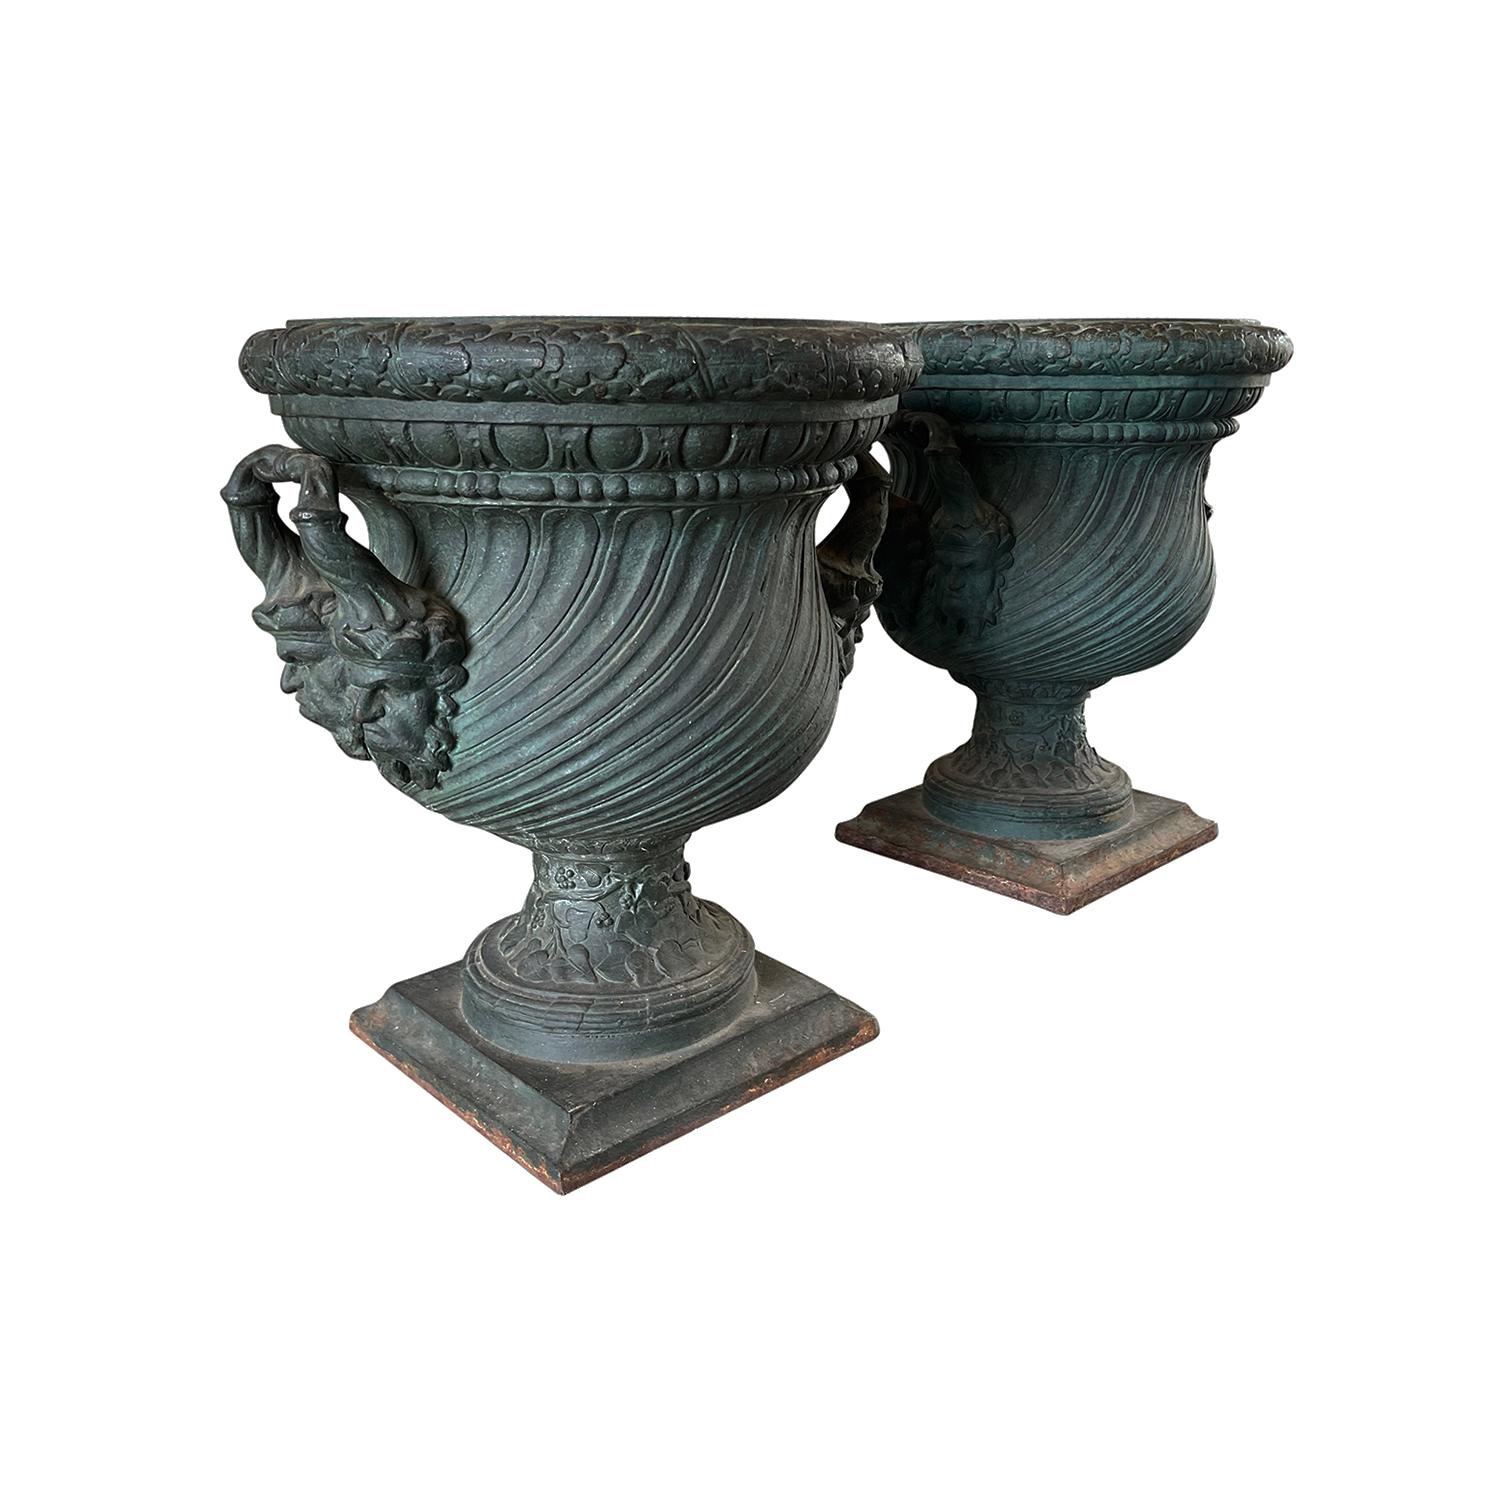 19th Century Pair of Ile de France Urns - Antique French Cast Iron Planters In Good Condition For Sale In West Palm Beach, FL